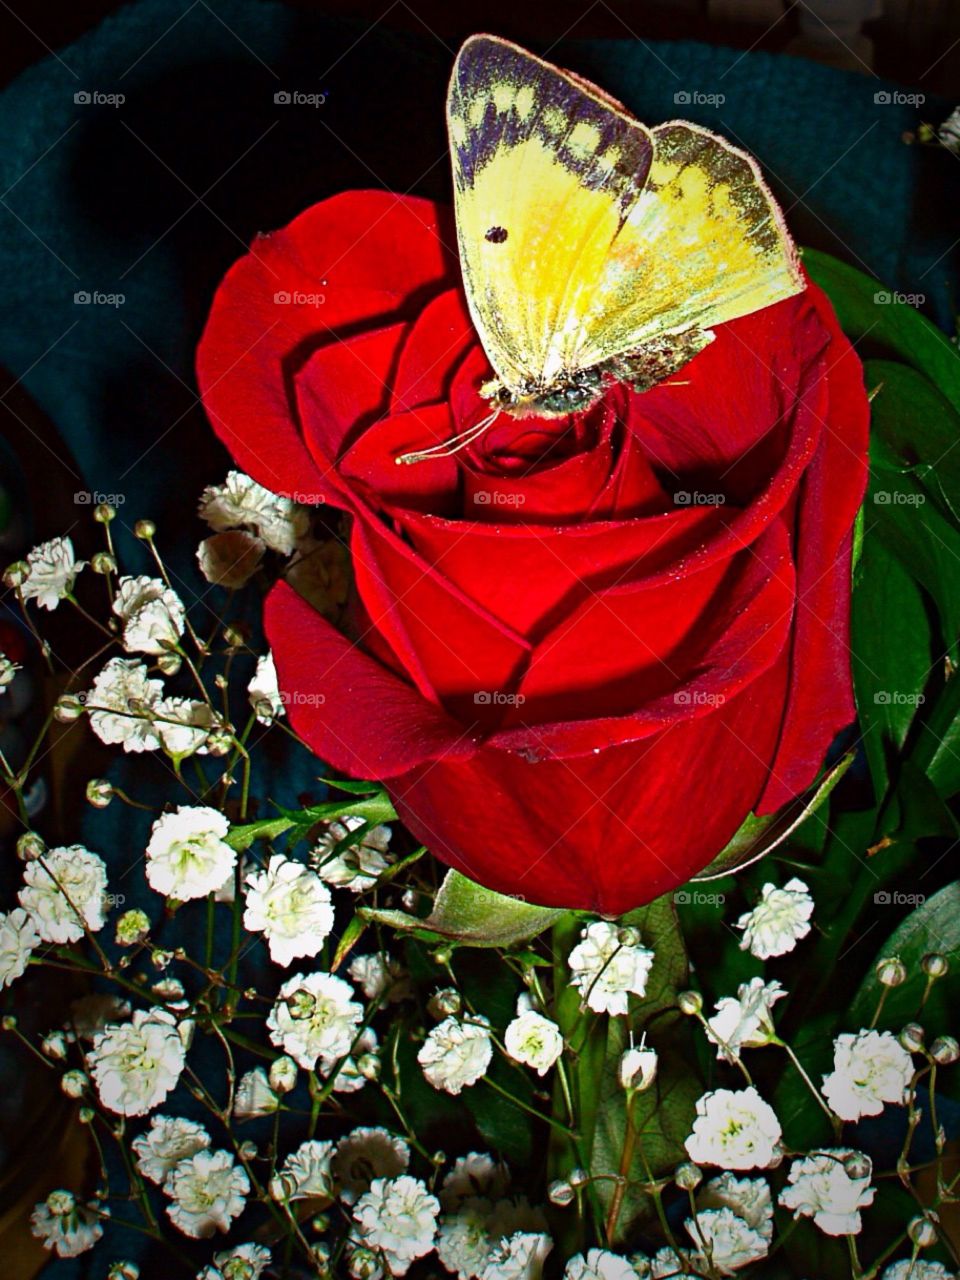 My Red Rose. Butterfly lands on My Red Rose